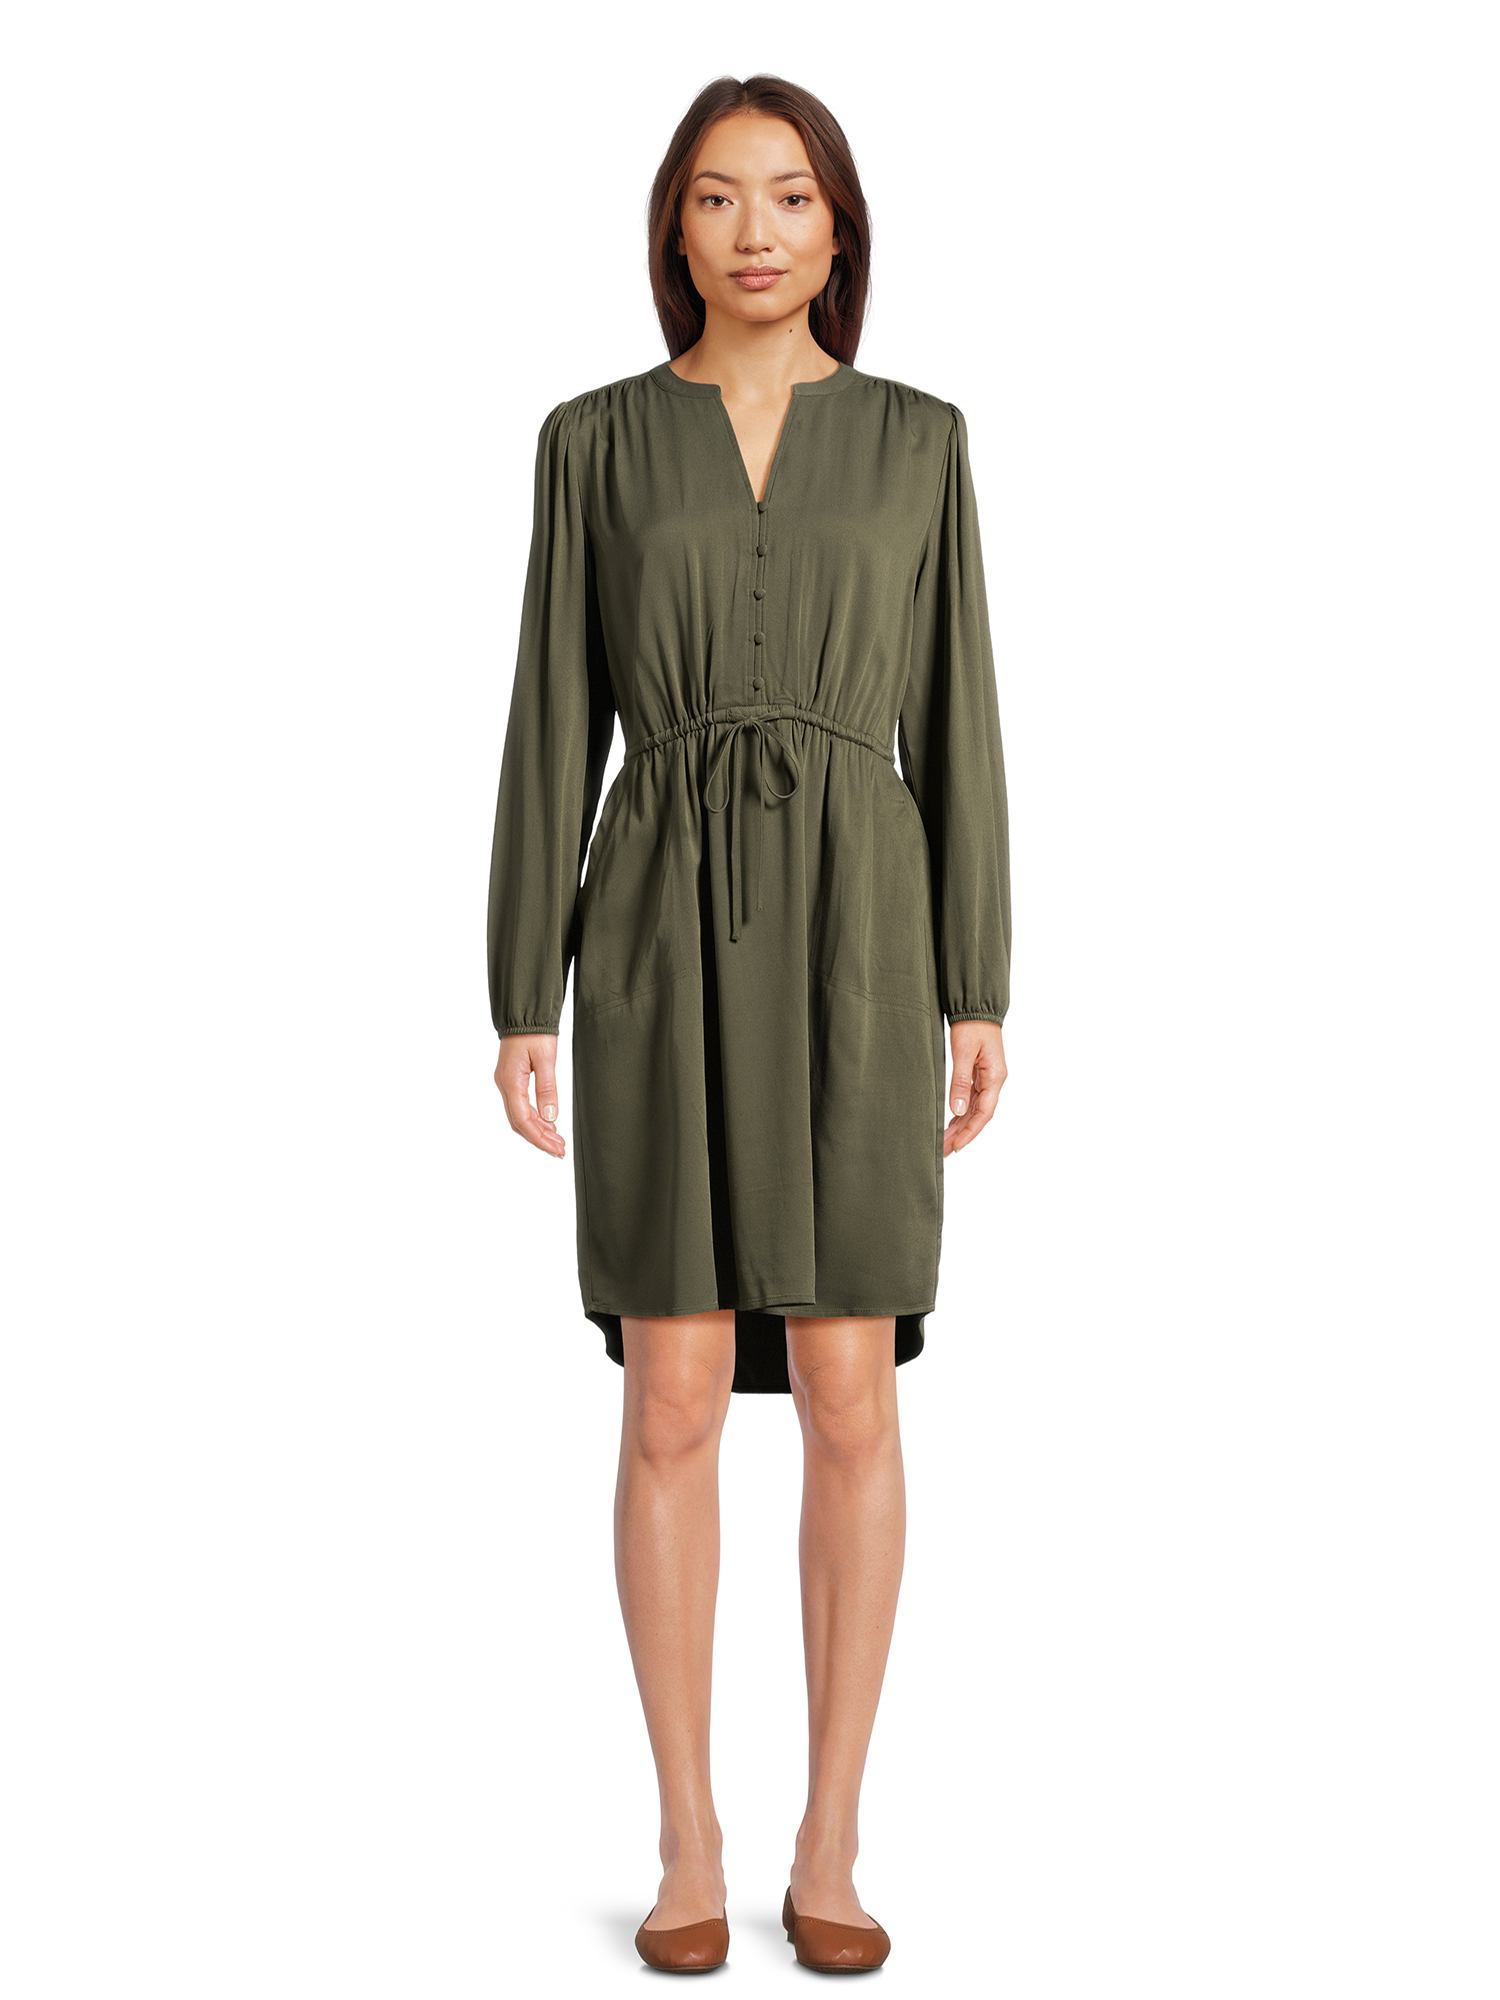 Time and Tru Women's Button Front Drawstring Waist Dress with Long Sleeves, Sizes XS-3XL - image 1 of 5